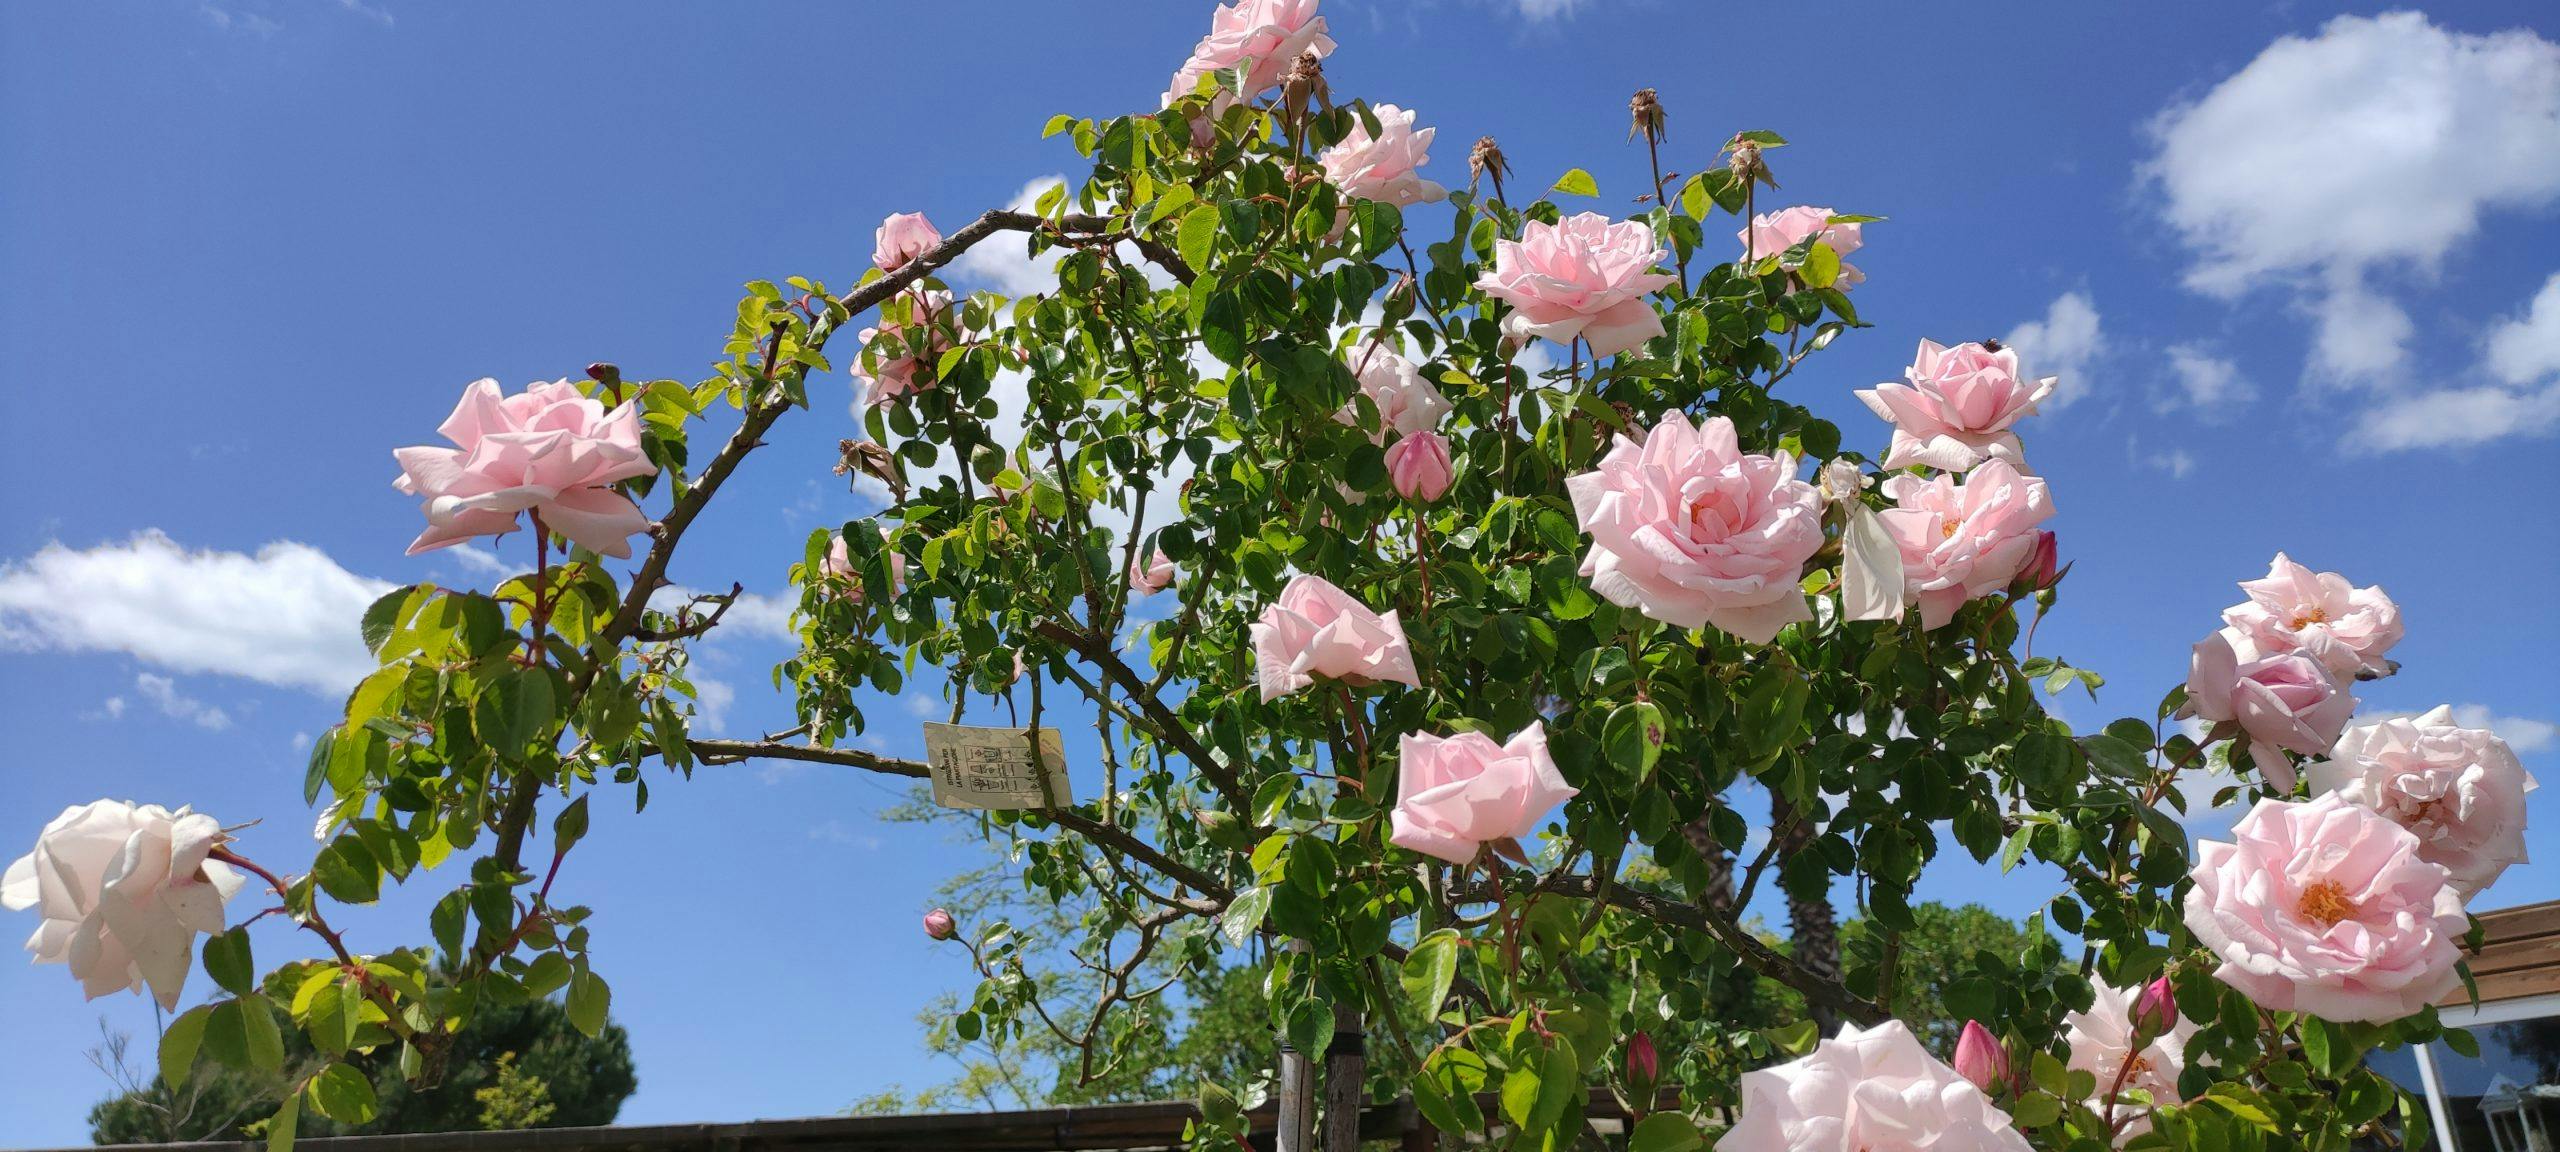 roses with a blue sky